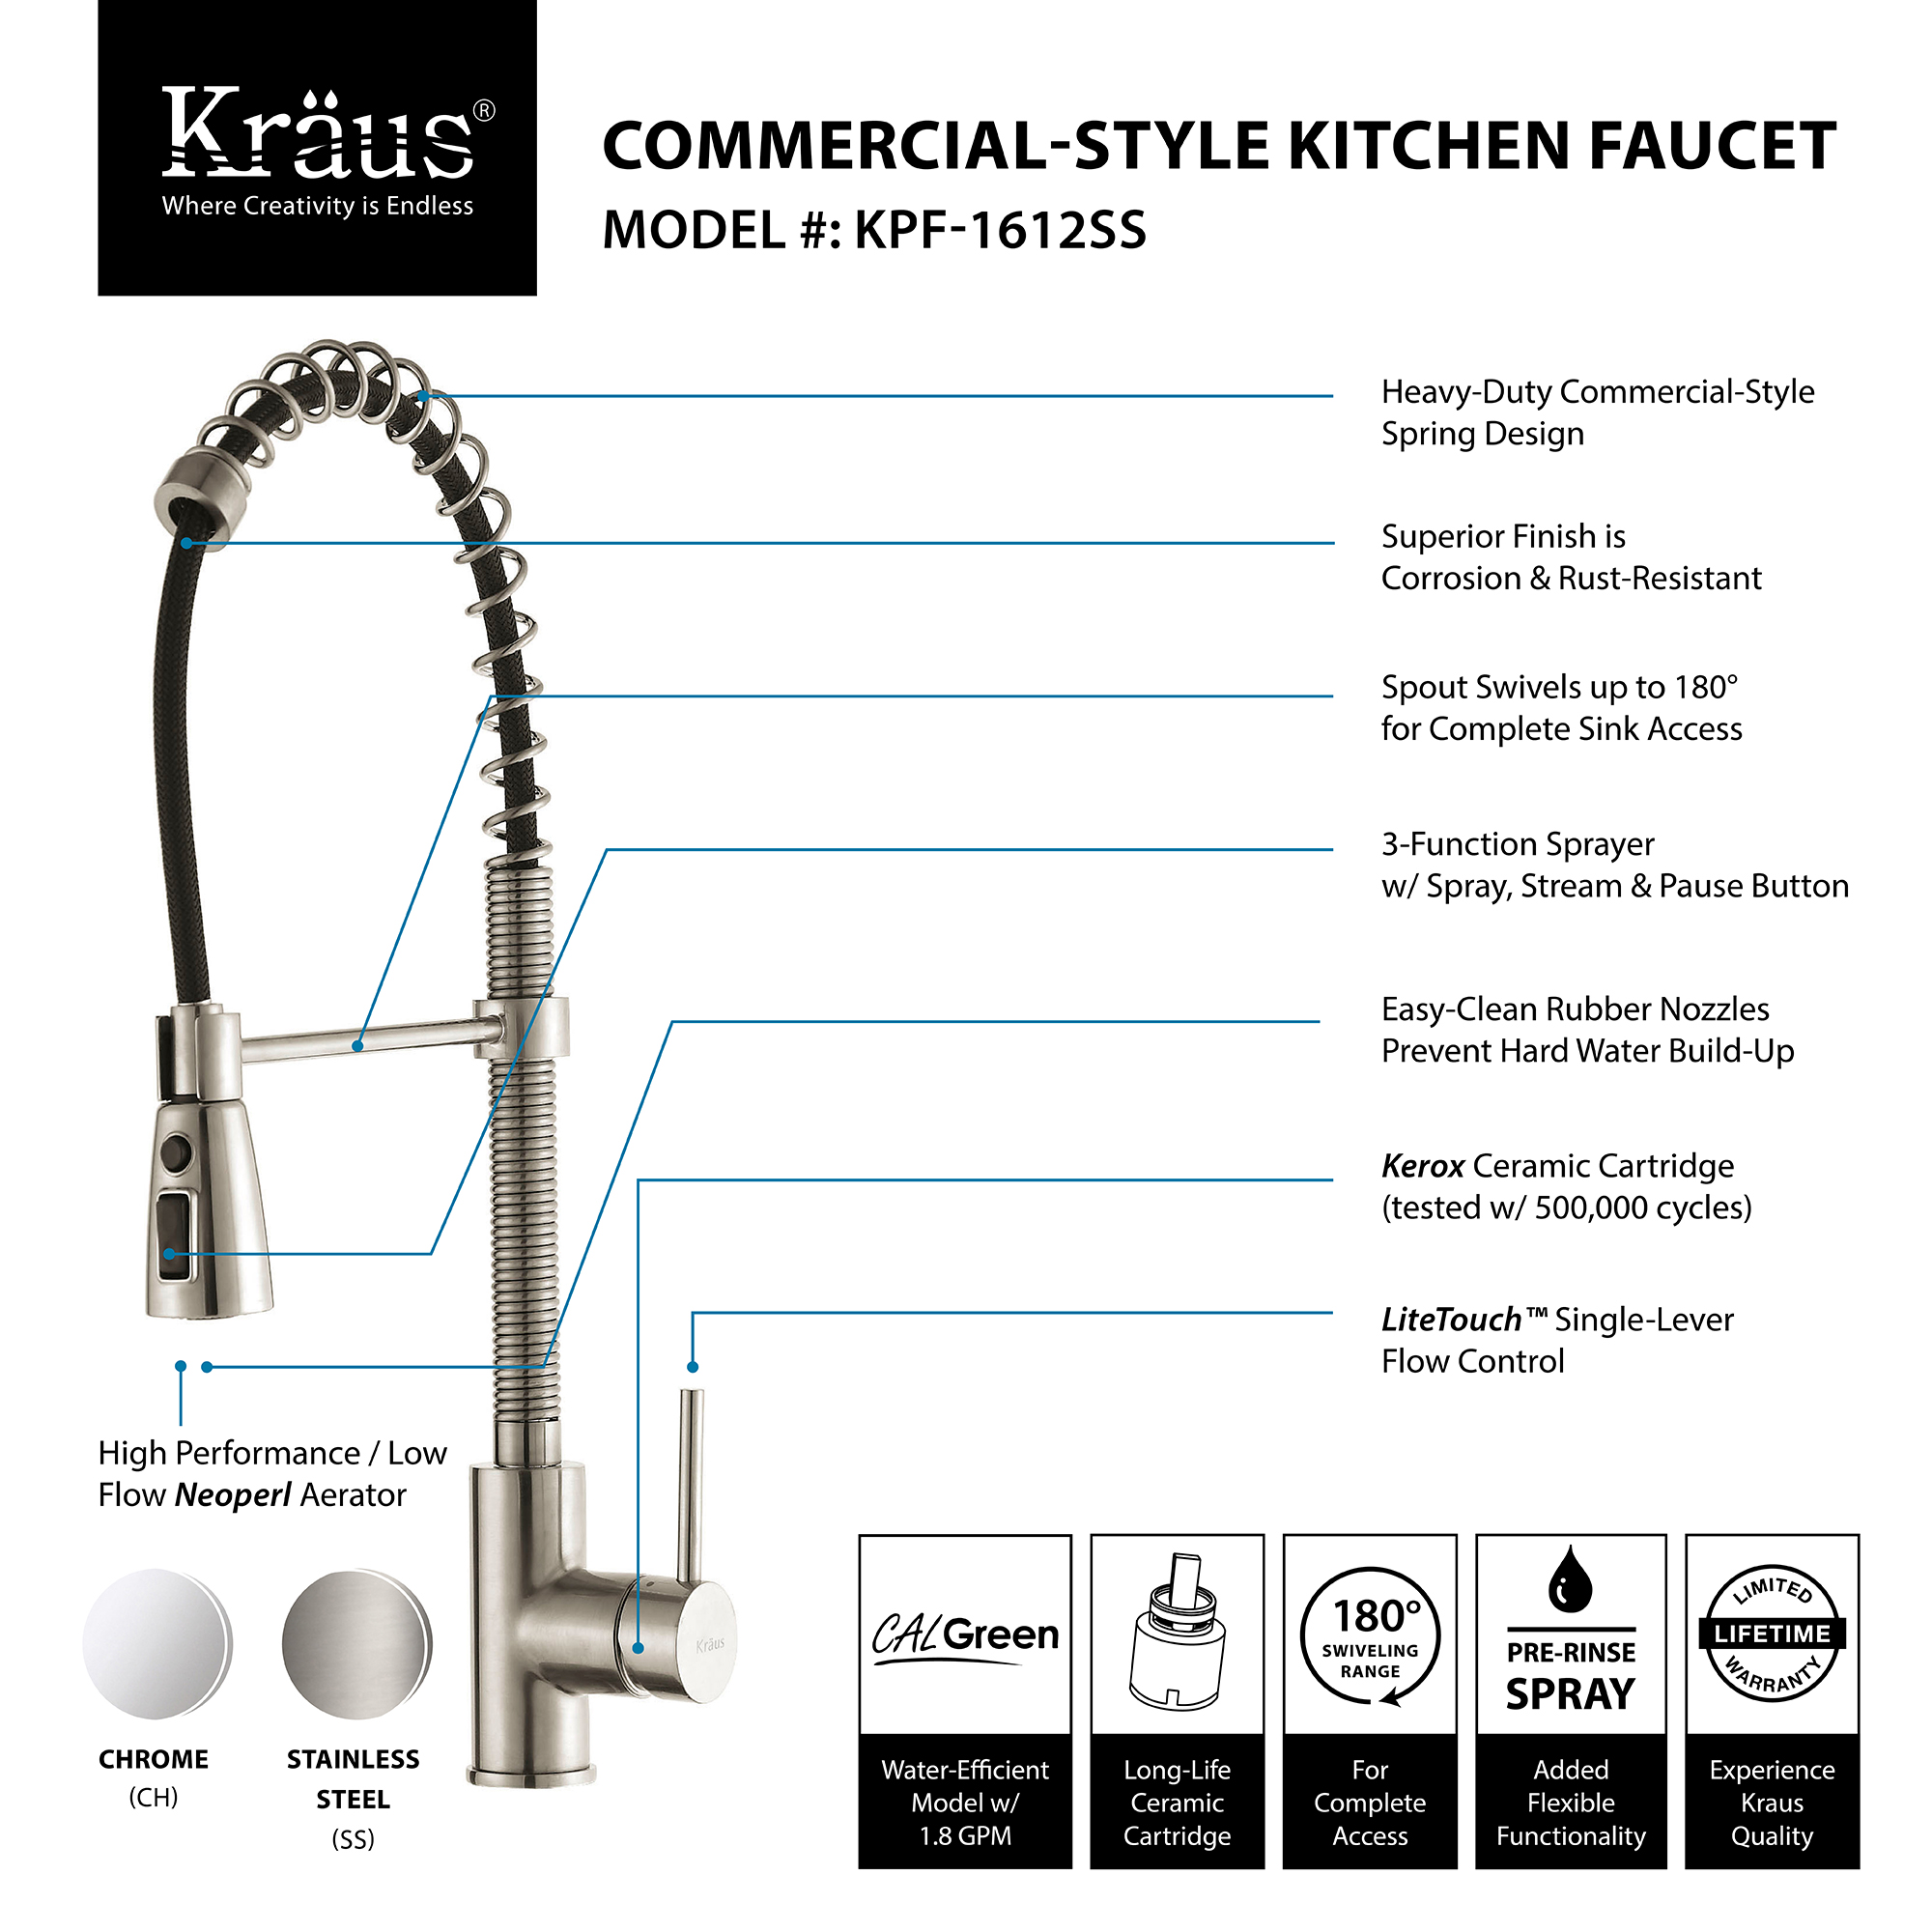 KRAUS 30 Inch Undermount Single Bowl 16 Gauge Stainless Steel Kitchen Sink with Commercial Style Kitchen Faucet & Soap Dispenser in Stainless Steel - image 3 of 12